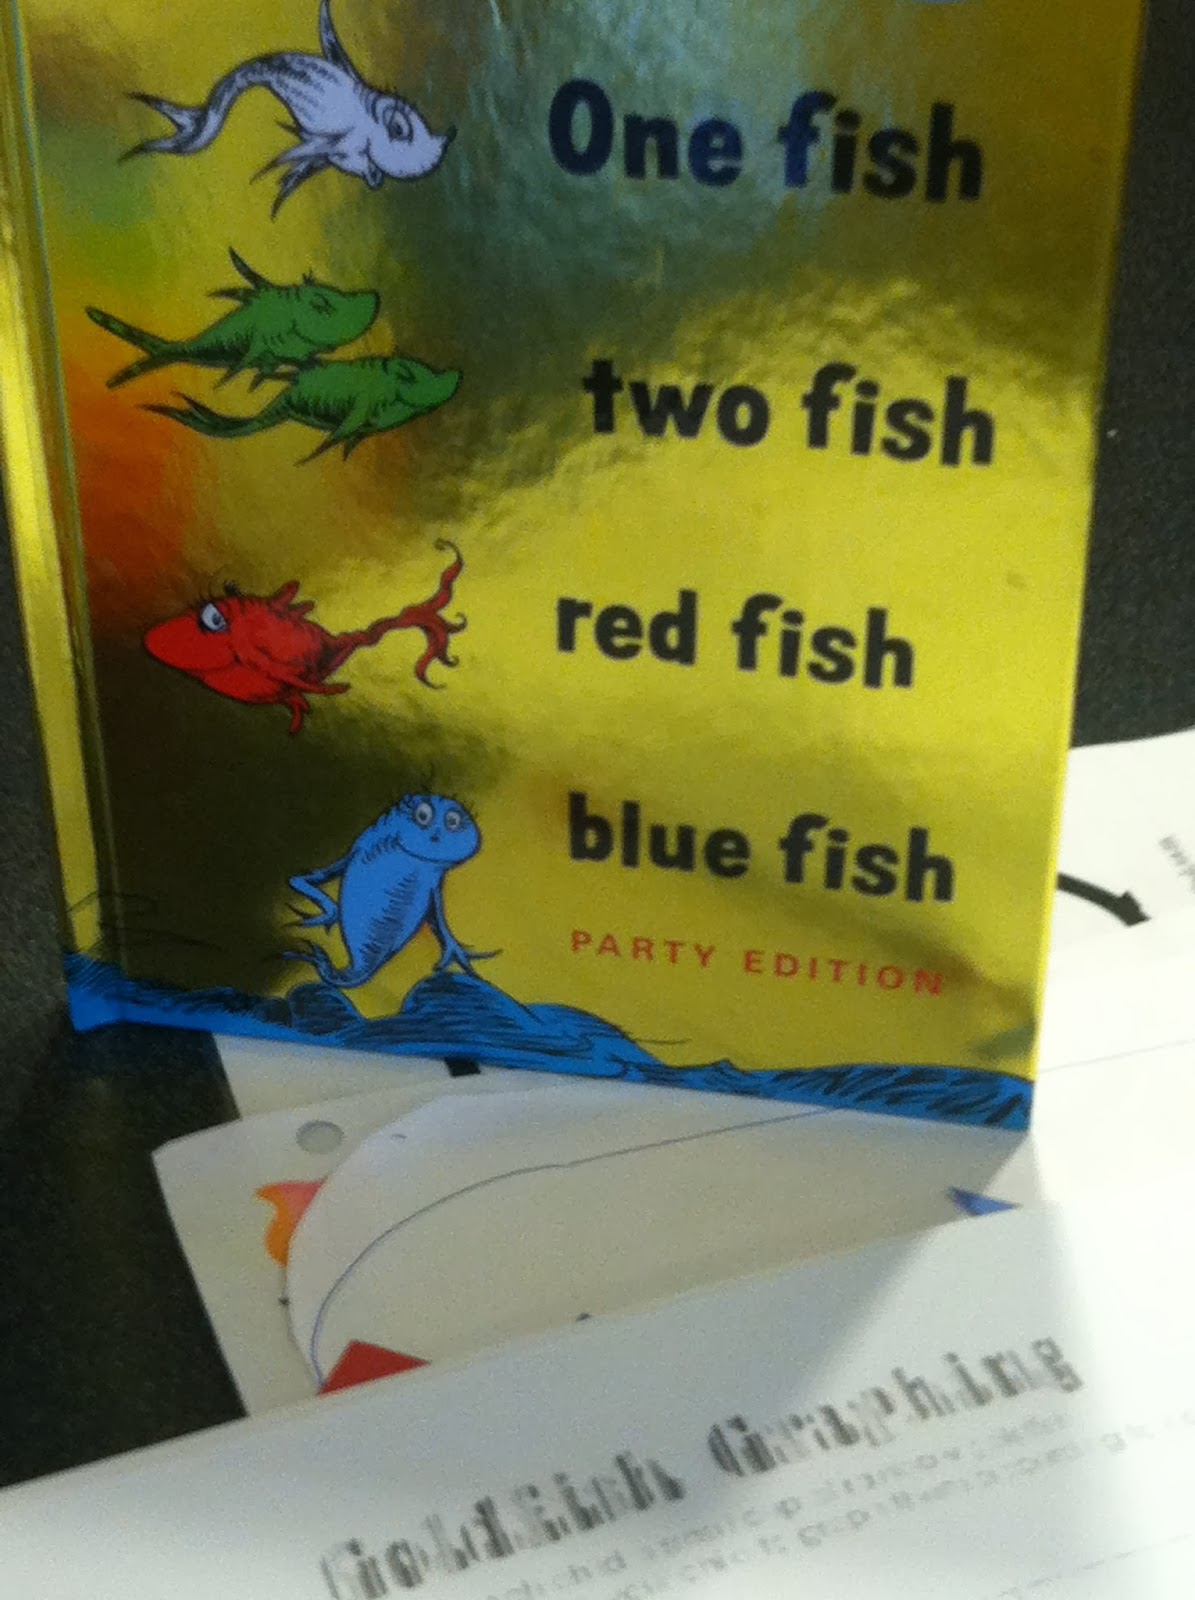 ABC's of Jess's house: One Fish, Two Fish, Red fish, Blue Fish